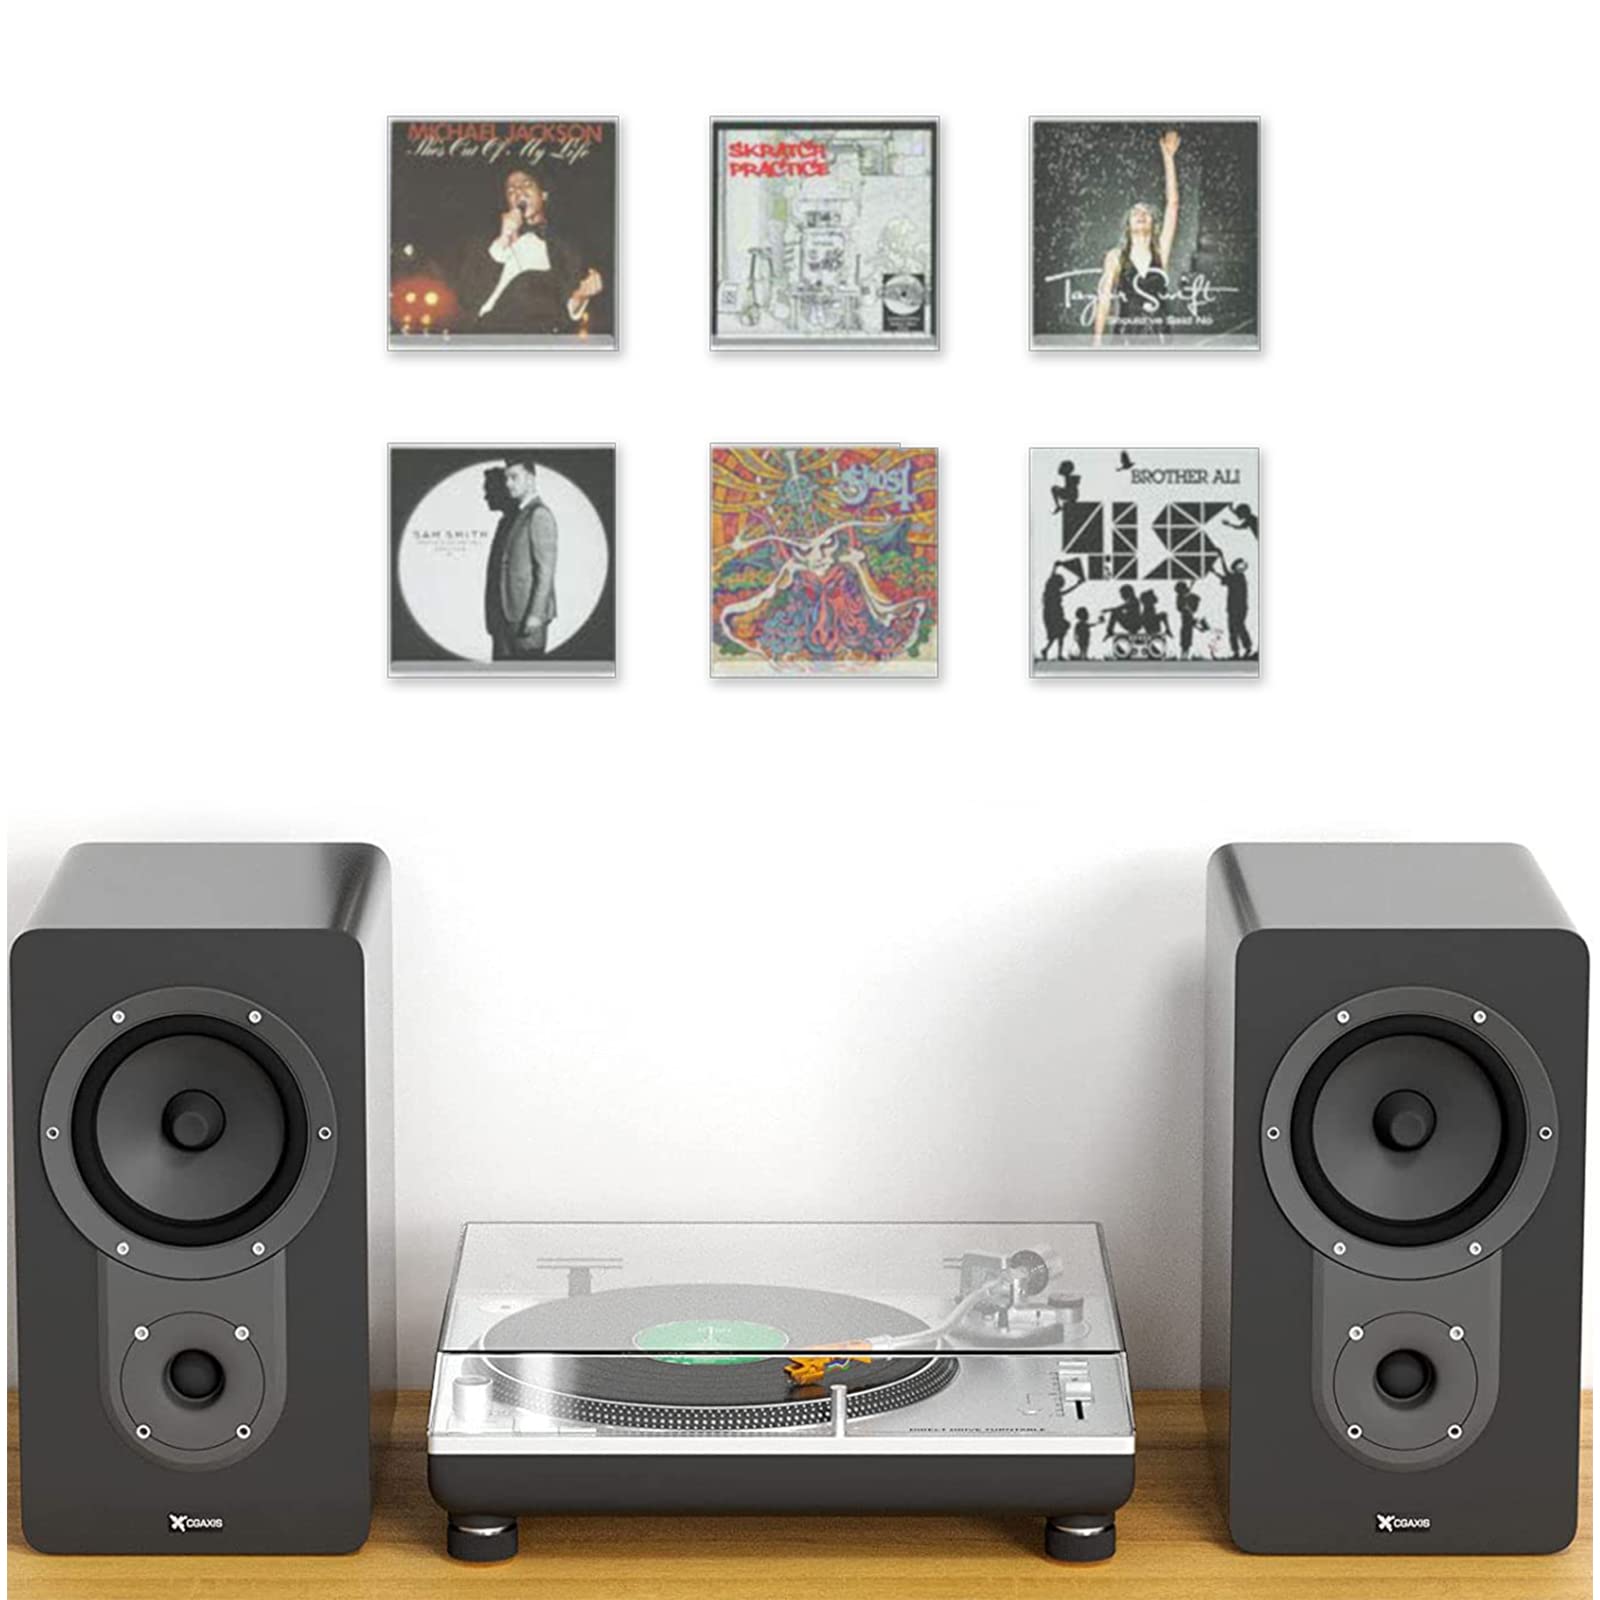 Cootack Vinyl Record Shelf Wall Mount Set 6 Pack, Album Record Floating Holder Display Daily Listening and Decorate Your Office or Home (Clear 7'')